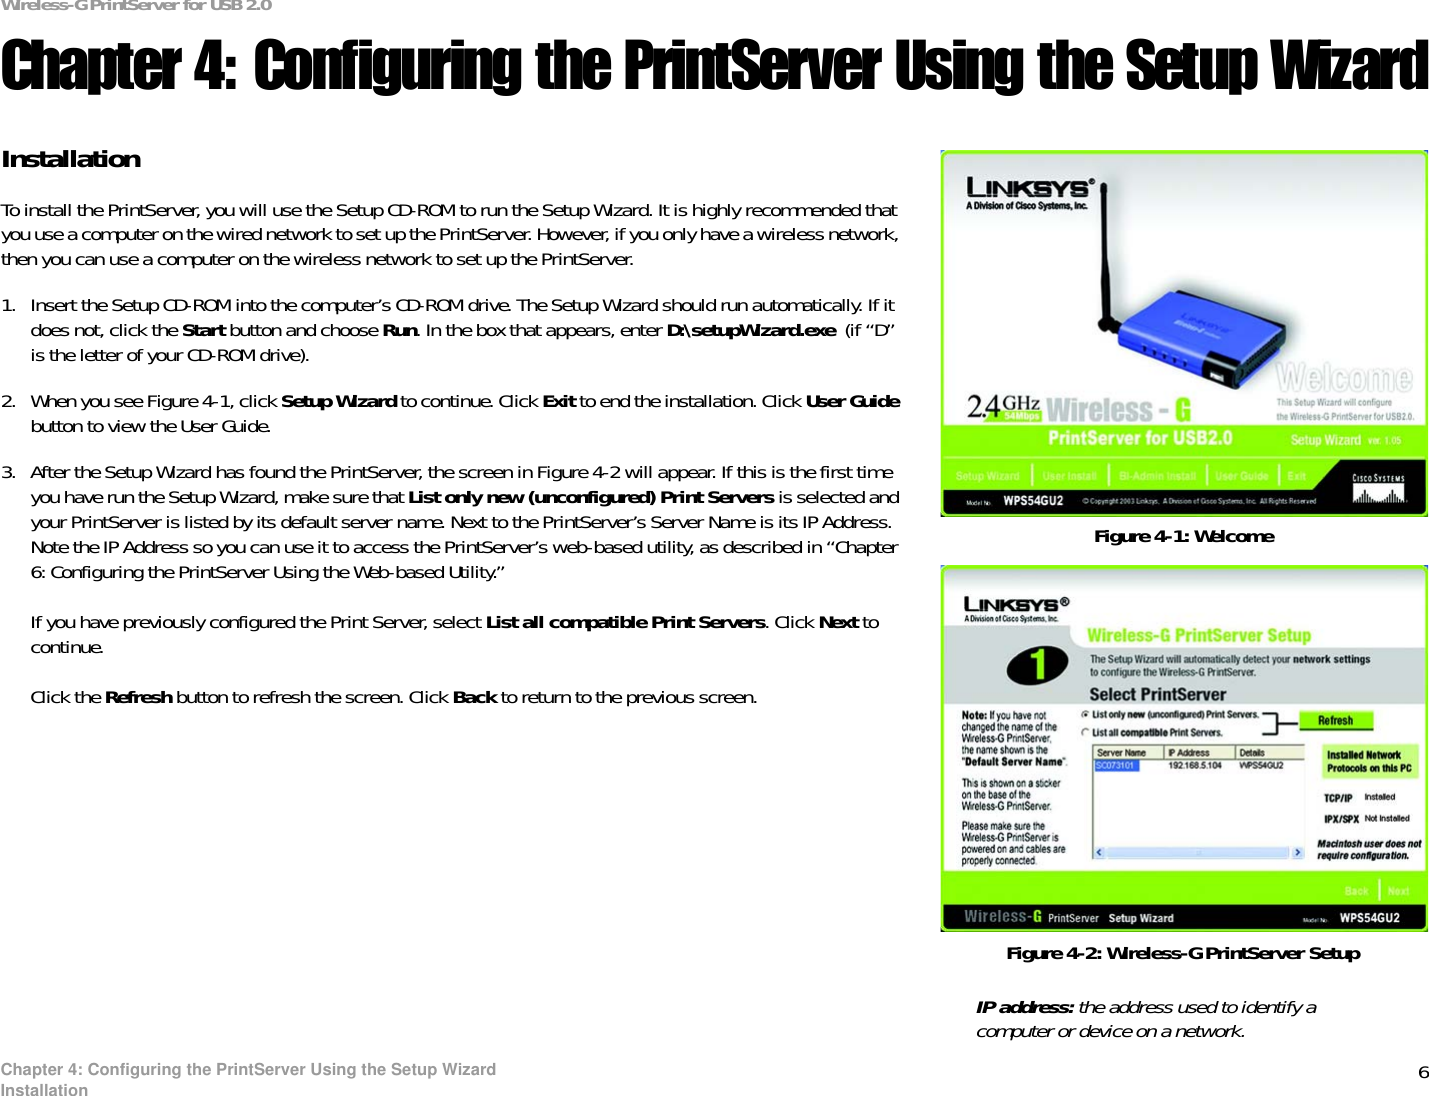 6Chapter 4: Configuring the PrintServer Using the Setup WizardInstallationWireless-G PrintServer for USB 2.0Chapter 4: Configuring the PrintServer Using the Setup WizardInstallationTo install the PrintServer, you will use the Setup CD-ROM to run the Setup Wizard. It is highly recommended that you use a computer on the wired network to set up the PrintServer. However, if you only have a wireless network, then you can use a computer on the wireless network to set up the PrintServer.1. Insert the Setup CD-ROM into the computer’s CD-ROM drive. The Setup Wizard should run automatically. If it does not, click the Start button and choose Run. In the box that appears, enter D:\setupWizard.exe  (if “D” is the letter of your CD-ROM drive).2. When you see Figure 4-1, click Setup Wizard to continue. Click Exit to end the installation. Click User Guidebutton to view the User Guide.3. After the Setup Wizard has found the PrintServer, the screen in Figure 4-2 will appear. If this is the first time you have run the Setup Wizard, make sure that List only new (unconfigured) Print Servers is selected and your PrintServer is listed by its default server name. Next to the PrintServer’s Server Name is its IP Address. Note the IP Address so you can use it to access the PrintServer’s web-based utility, as described in “Chapter 6: Configuring the PrintServer Using the Web-based Utility.”If you have previously configured the Print Server, select List all compatible Print Servers. Click Next to continue.Click the Refresh button to refresh the screen. Click Back to return to the previous screen.Figure 4-1: WelcomeFigure 4-2: Wireless-G PrintServer SetupIP address: the address used to identify a computer or device on a network.